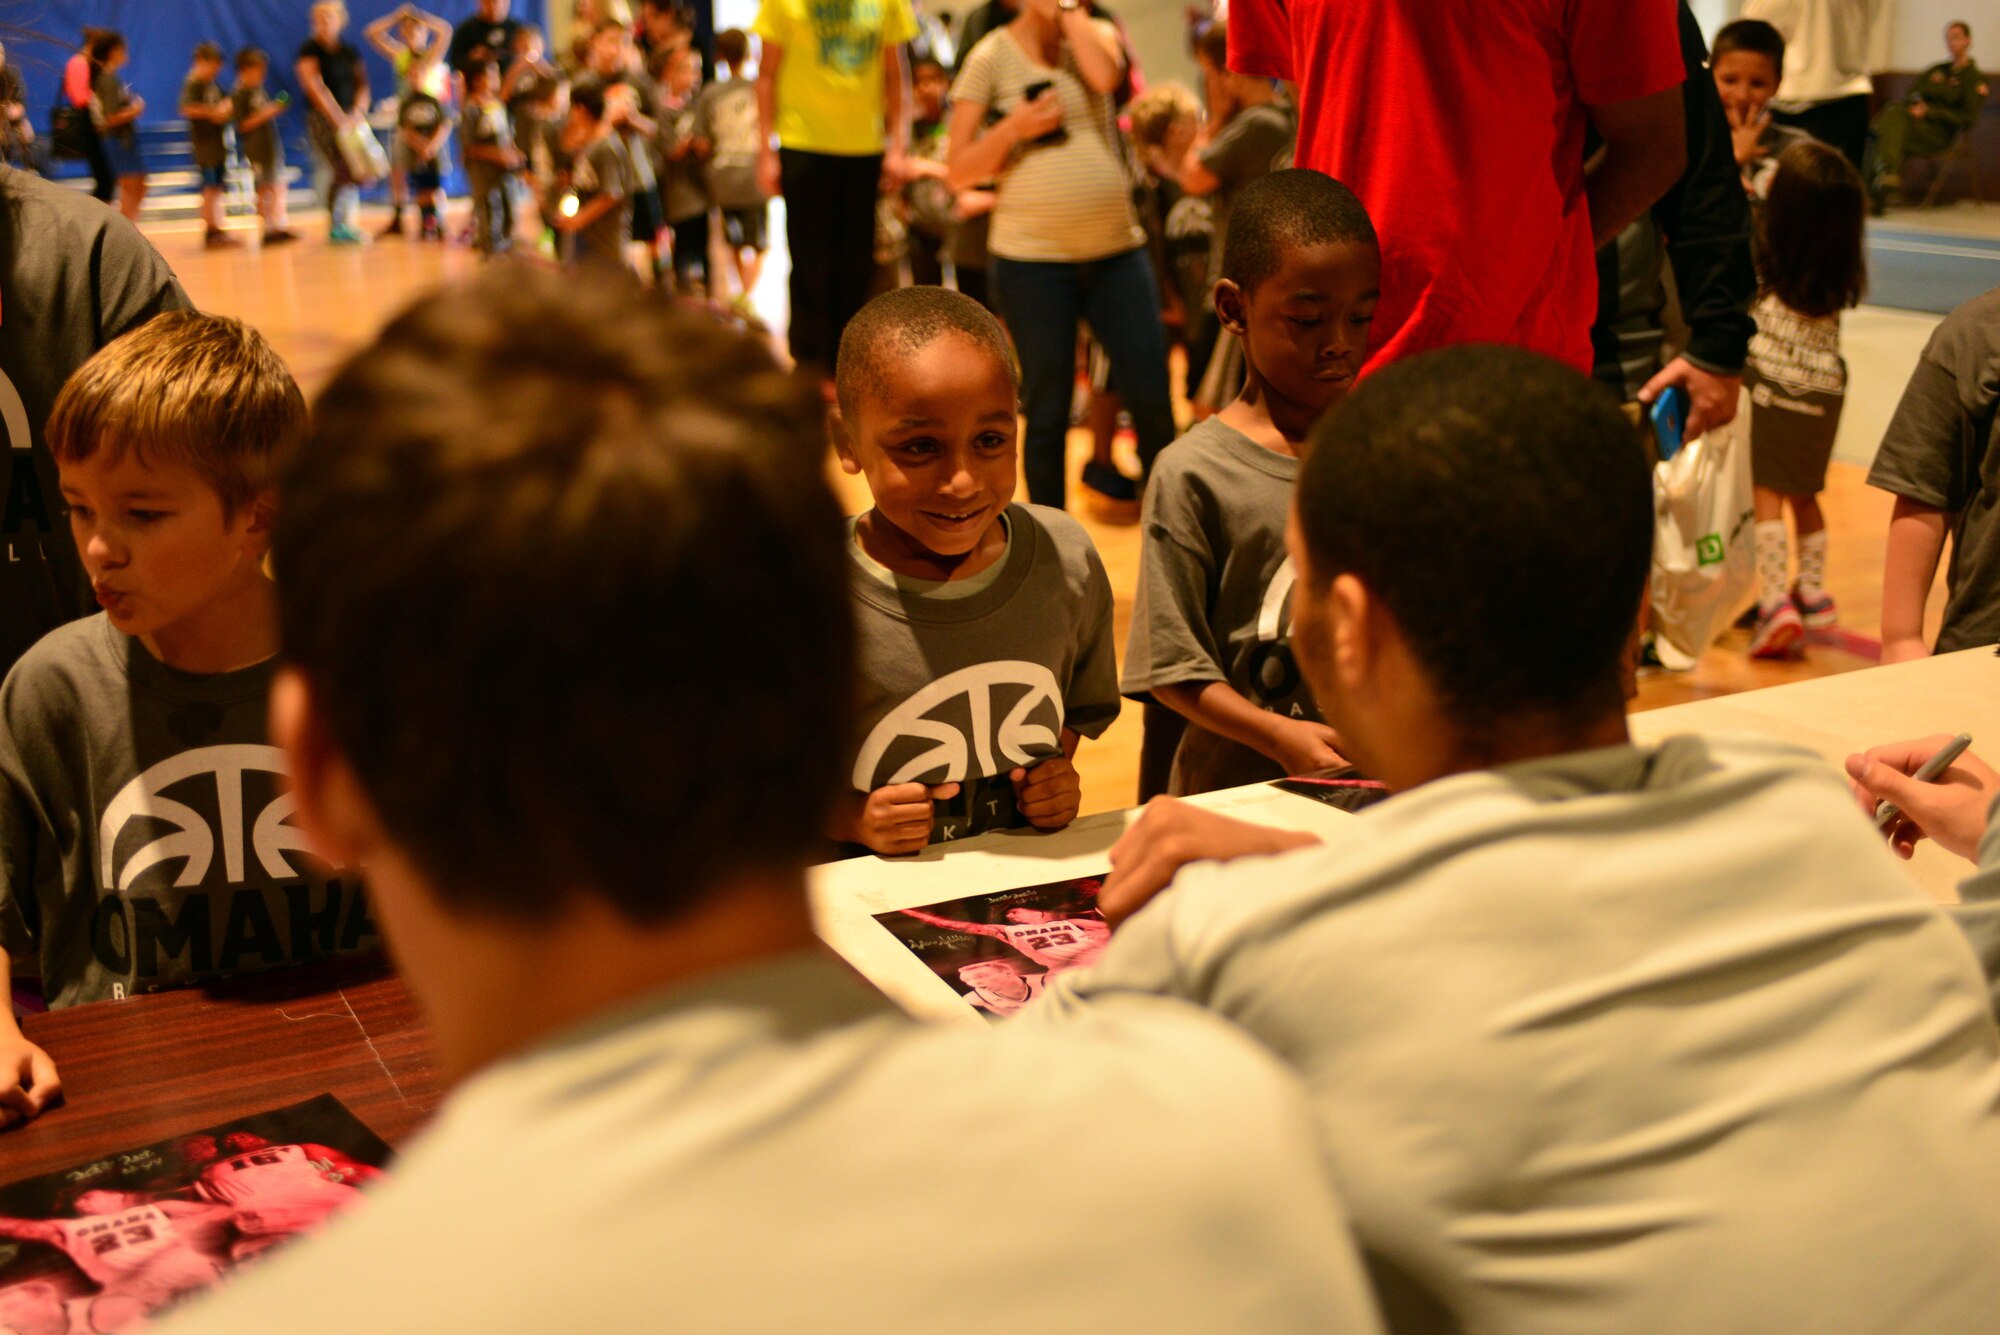 A Team Offutt child seeks an autograph from members of the University of Nebraska Omaha Mavericks men’s and women’s basketball teams Oct. 15, 2016 at the Offutt Field House.  The UNO Mavericks’ men’s and women’s basketball teams provided a free basketball clinic to more than 100 military-affiliated children. Nebraska Governor Pete Ricketts spoke to the campers and passed along thanks from the citizens of Nebraska to the members of Team Offutt. 